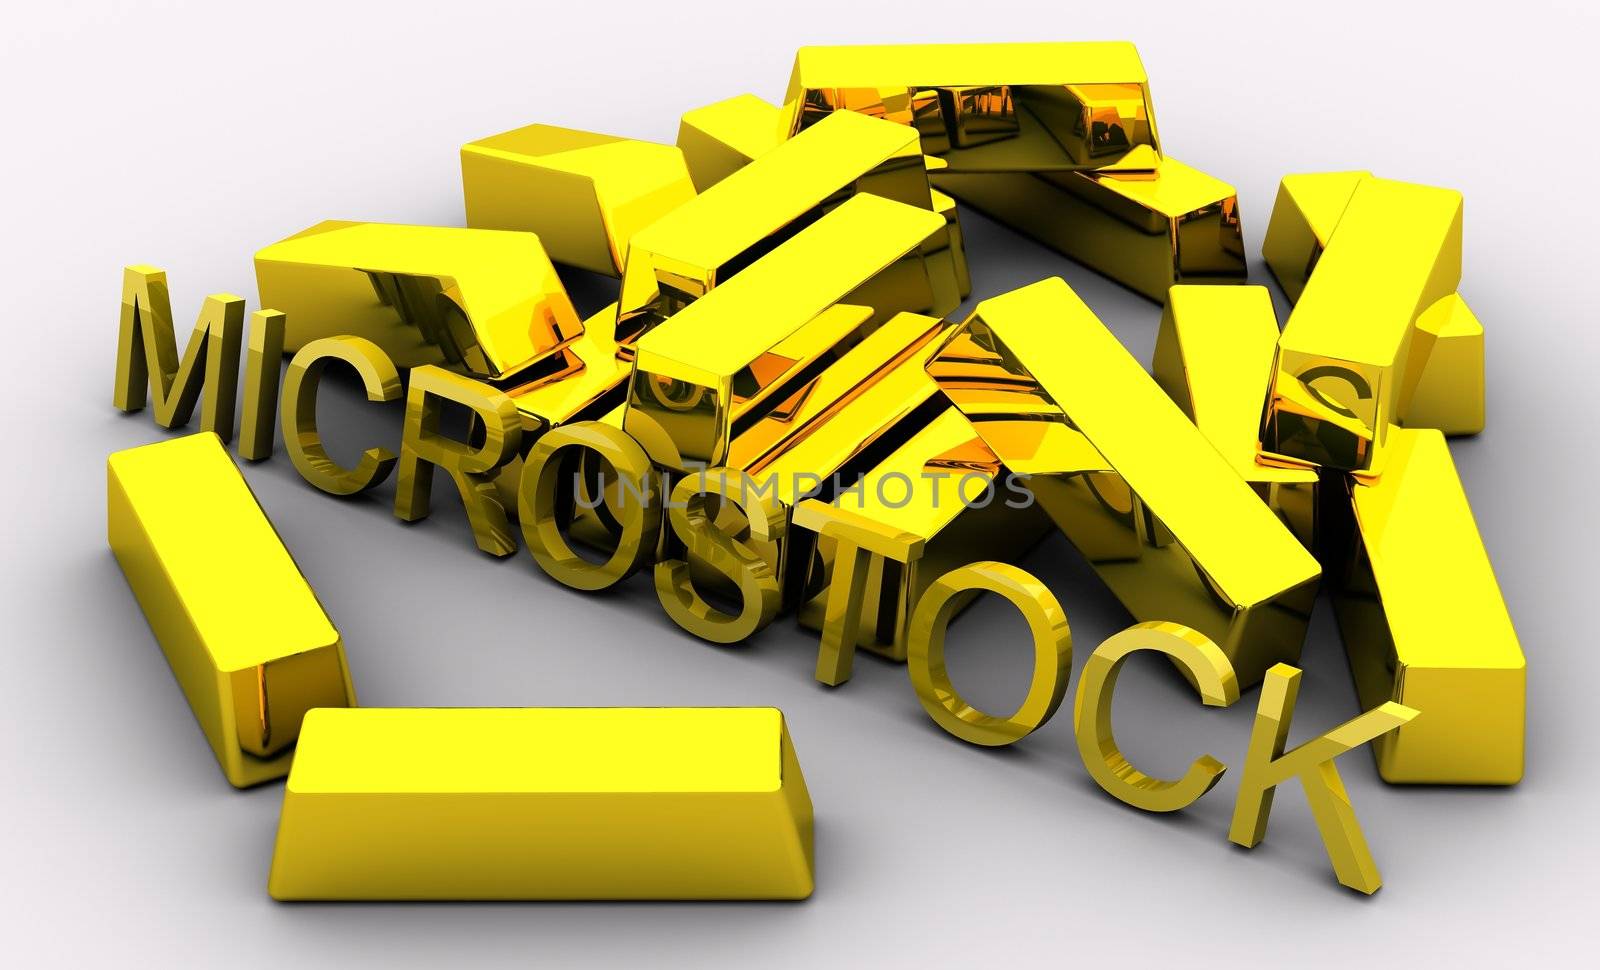 Metaphoric concept of getting fortunate by submitting and selling stock images at microstock agencies. Idea is emphasized by golden microstock text displayed near pile of gold bricks. Scene rendered and isolated on white background.